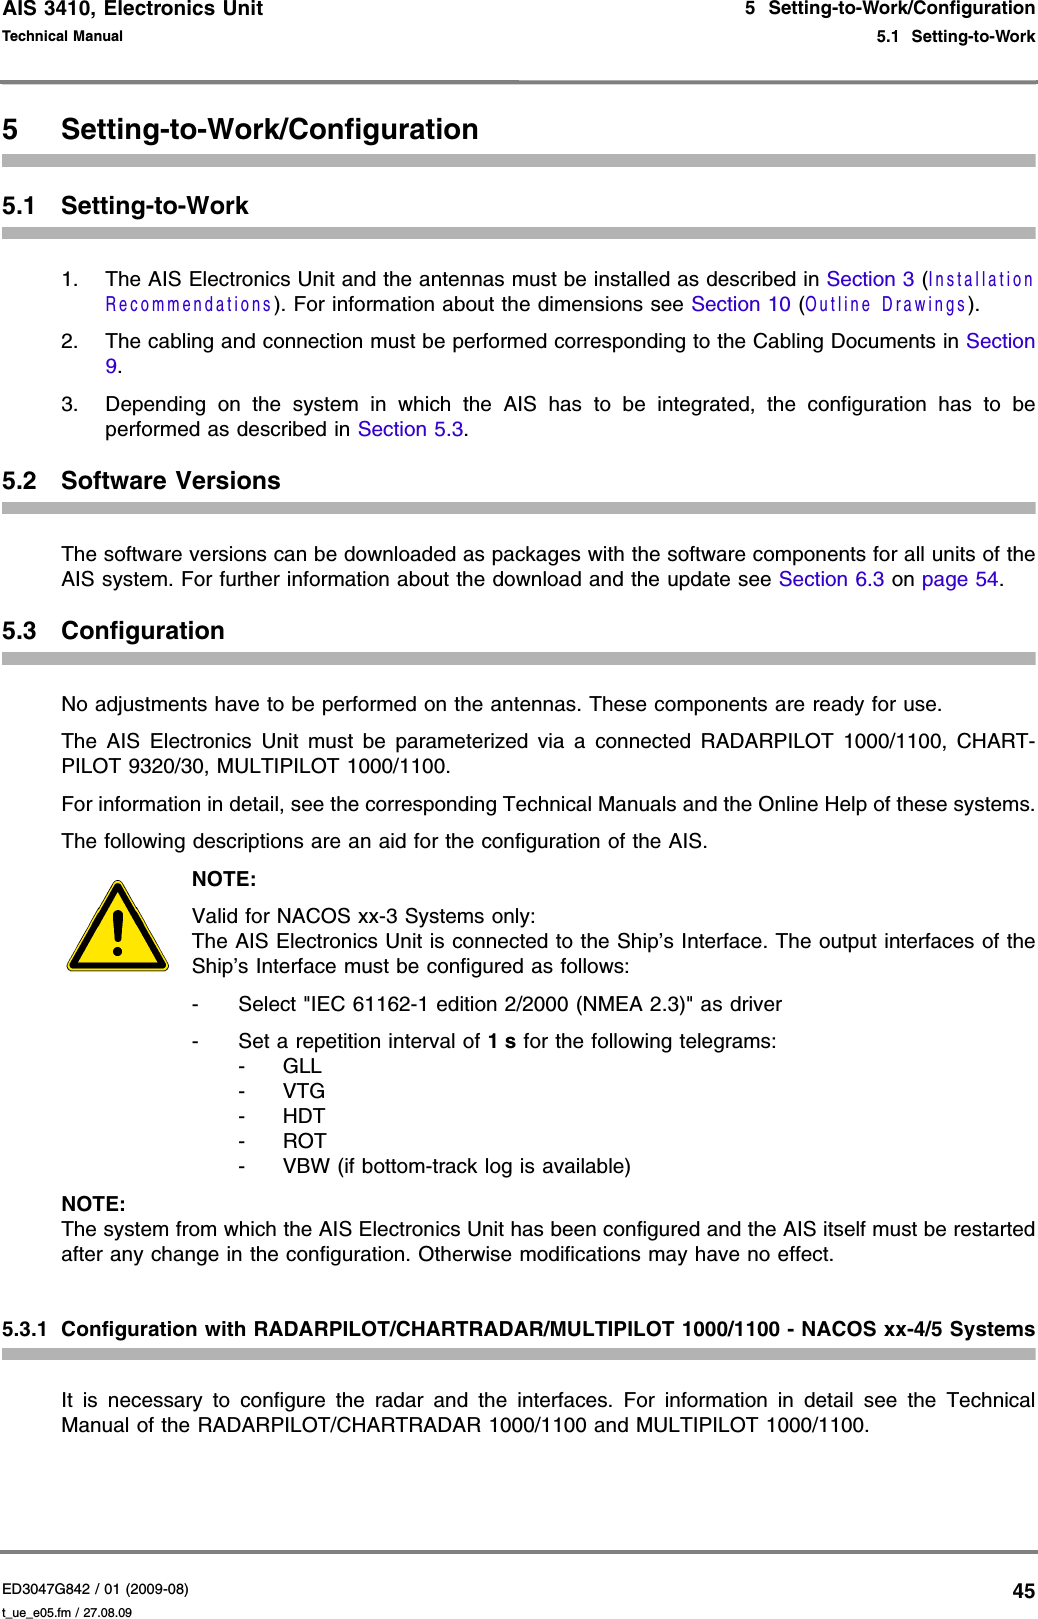 AIS 3410, Electronics UnitED3047G842 / 01 (2009-08)Technical Manual5  Setting-to-Work/Configuration5.1  Setting-to-Workt_ue_e05.fm / 27.08.09455 Setting-to-Work/Configuration5.1 Setting-to-Work1. The AIS Electronics Unit and the antennas must be installed as described in Section 3 (Installation Recommendations). For information about the dimensions see Section 10 (Outline Drawings).2. The cabling and connection must be performed corresponding to the Cabling Documents in Section 9.3. Depending on the system in which the AIS has to be integrated, the configuration has to be performed as described in Section 5.3.5.2 Software VersionsThe software versions can be downloaded as packages with the software components for all units of the AIS system. For further information about the download and the update see Section 6.3 on page 54.5.3 ConfigurationNo adjustments have to be performed on the antennas. These components are ready for use.The AIS Electronics Unit must be parameterized via a connected RADARPILOT 1000/1100, CHART-PILOT 9320/30, MULTIPILOT 1000/1100.For information in detail, see the corresponding Technical Manuals and the Online Help of these systems.The following descriptions are an aid for the configuration of the AIS.NOTE:Valid for NACOS xx-3 Systems only: The AIS Electronics Unit is connected to the Ship’s Interface. The output interfaces of the Ship’s Interface must be configured as follows:- Select &quot;IEC 61162-1 edition 2/2000 (NMEA 2.3)&quot; as driver- Set a repetition interval of 1 s for the following telegrams: -GLL -VTG -HDT -ROT - VBW (if bottom-track log is available)NOTE:The system from which the AIS Electronics Unit has been configured and the AIS itself must be restarted after any change in the configuration. Otherwise modifications may have no effect.5.3.1 Configuration with RADARPILOT/CHARTRADAR/MULTIPILOT 1000/1100 - NACOS xx-4/5 SystemsIt is necessary to configure the radar and the interfaces. For information in detail see the Technical Manual of the RADARPILOT/CHARTRADAR 1000/1100 and MULTIPILOT 1000/1100.